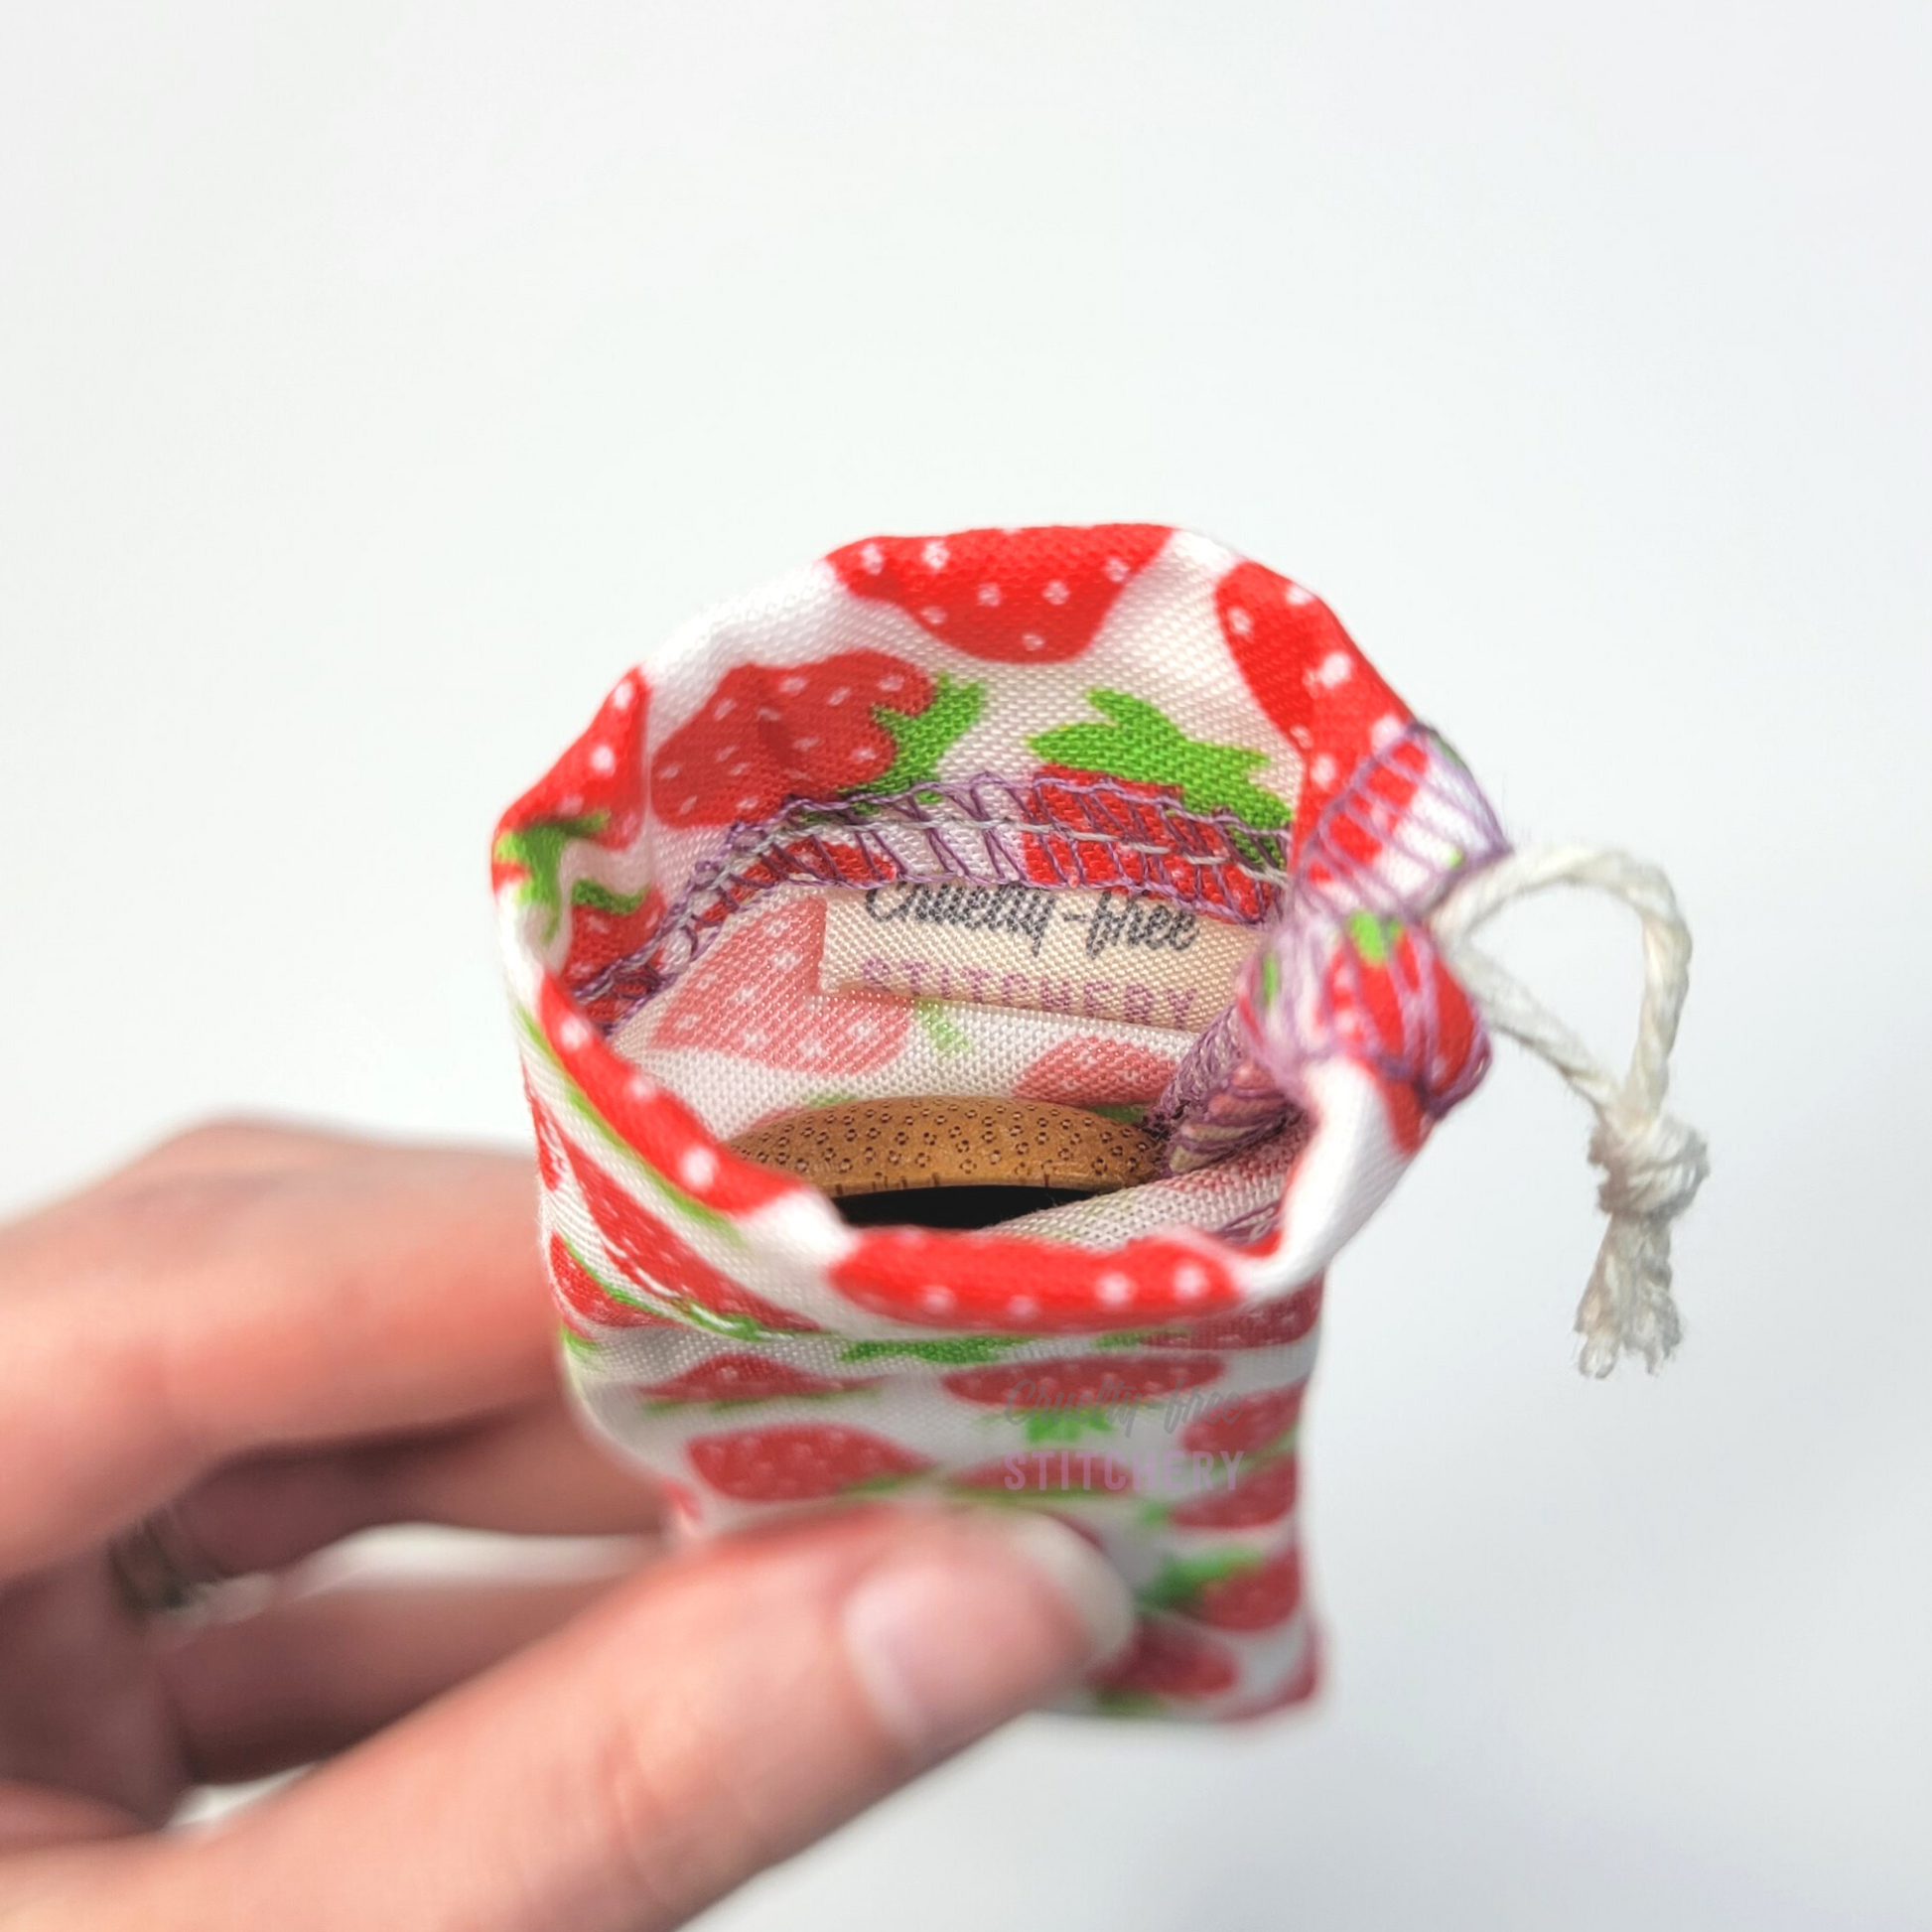 A reusable spork pouch, viewed from the top down. Inside the pouch is a tag with the Cruelty-Free Stitchery logo.